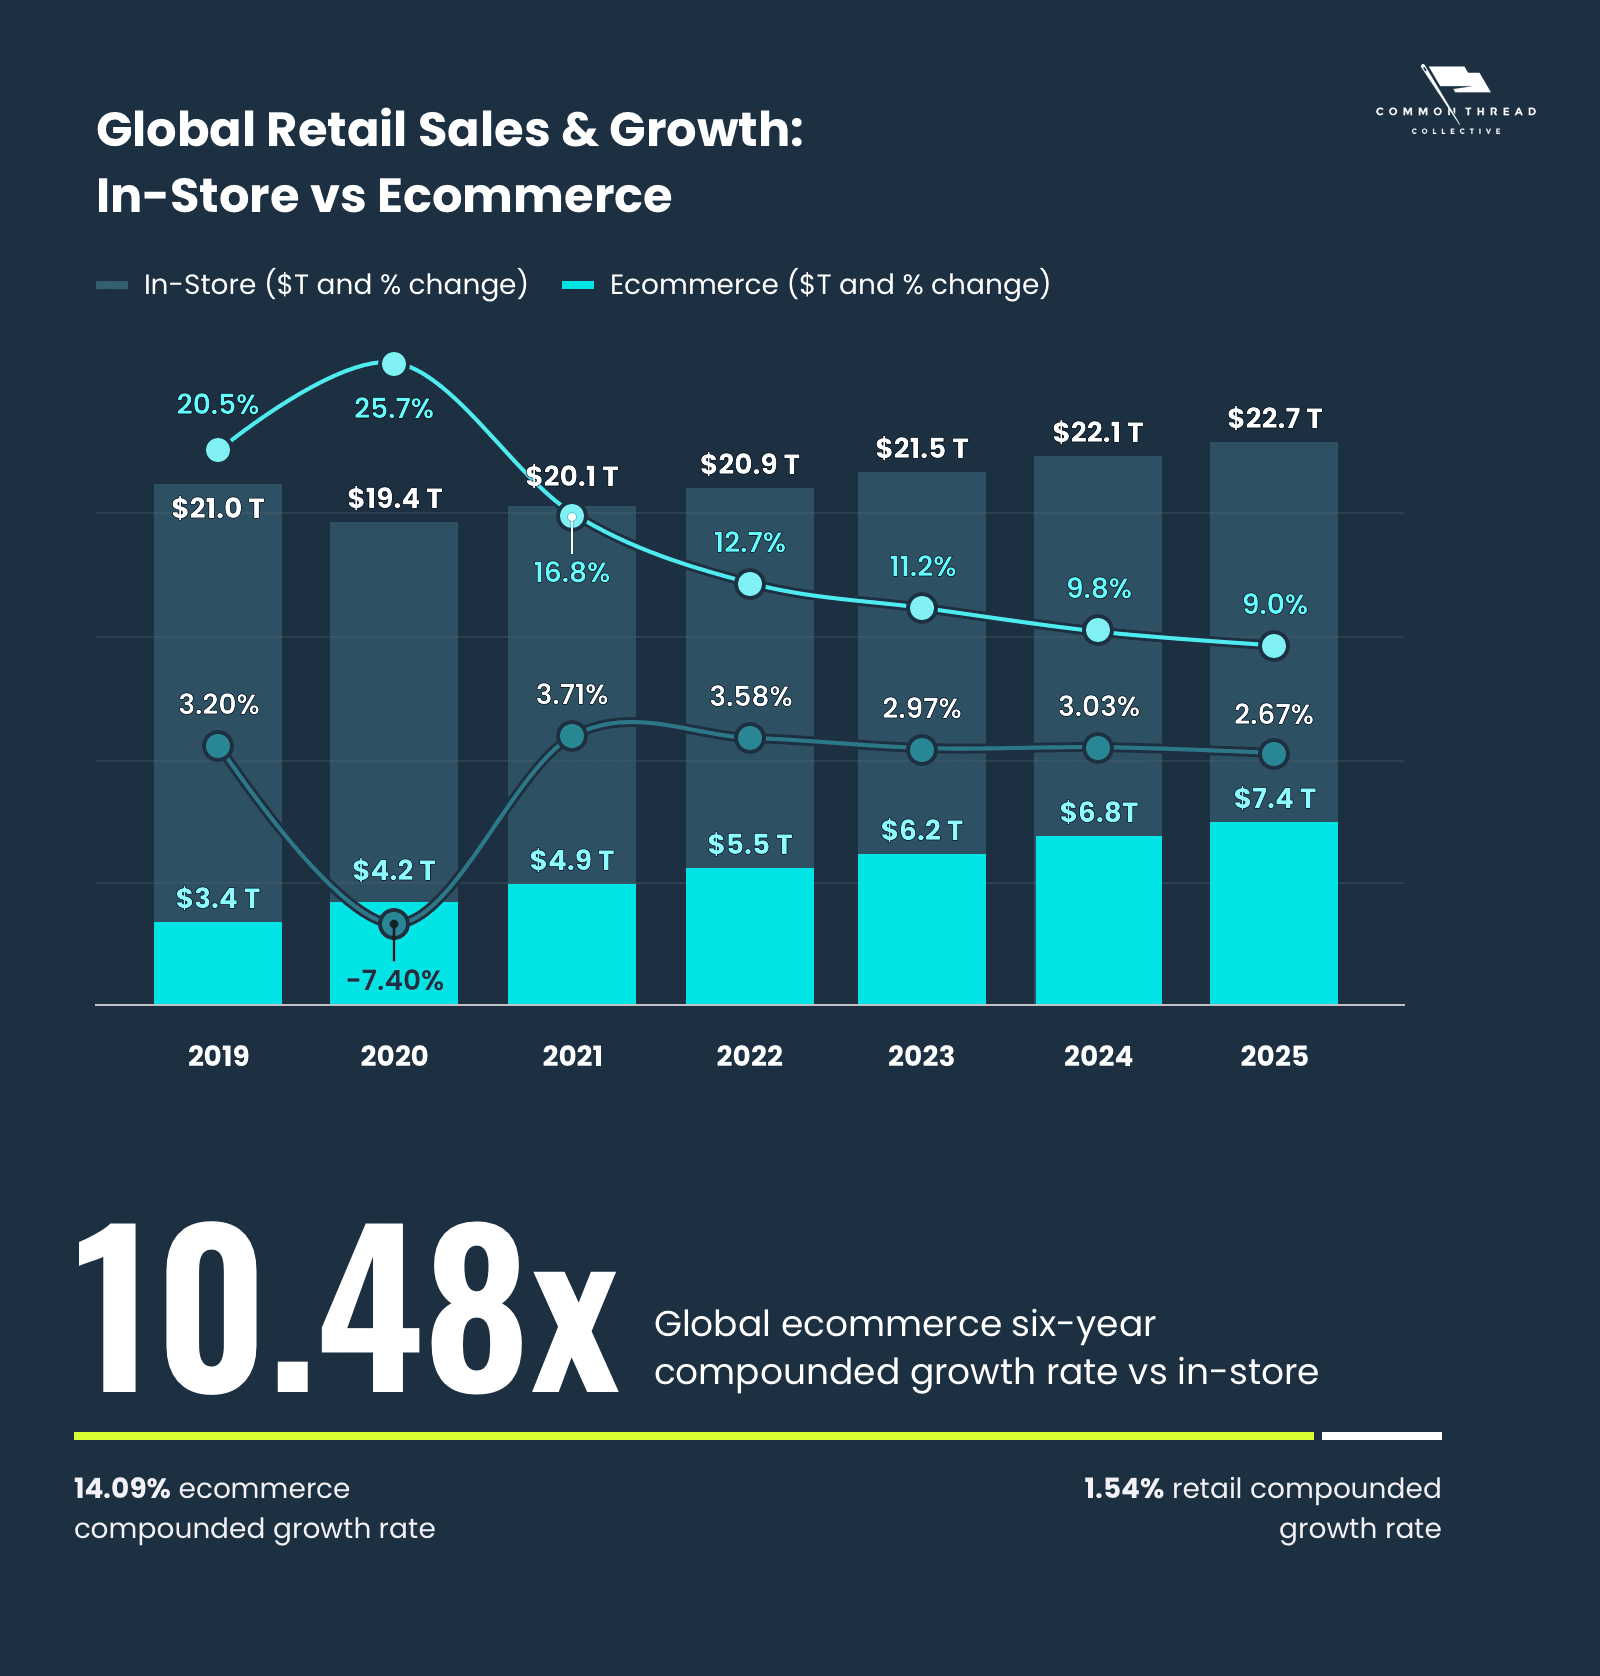 Ecommerce vs In-Store Global Retail Sales Growth - Year-over-Year 2019-2025